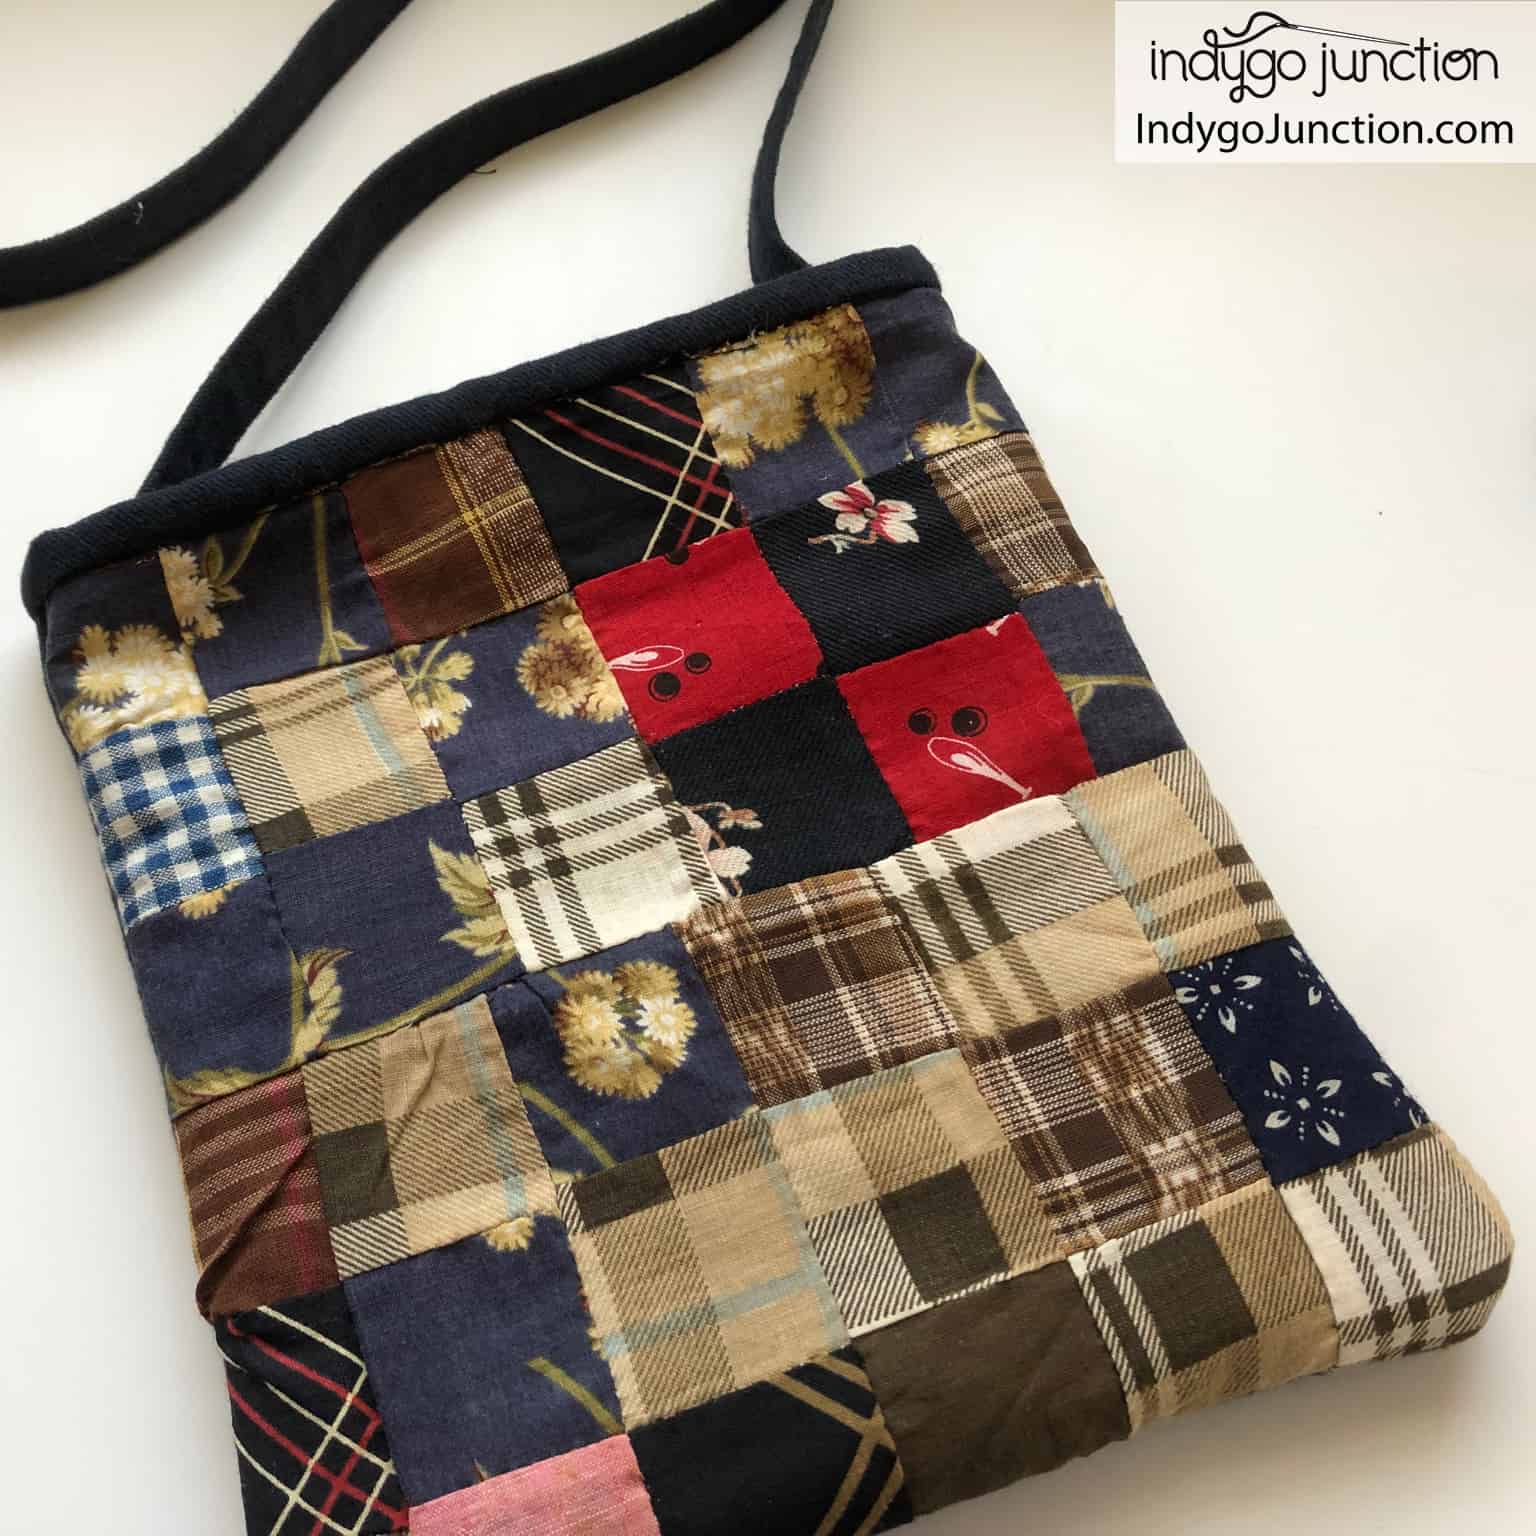 Vintage Made Modern – The Patchwork Bag and Railroad Quilt Block